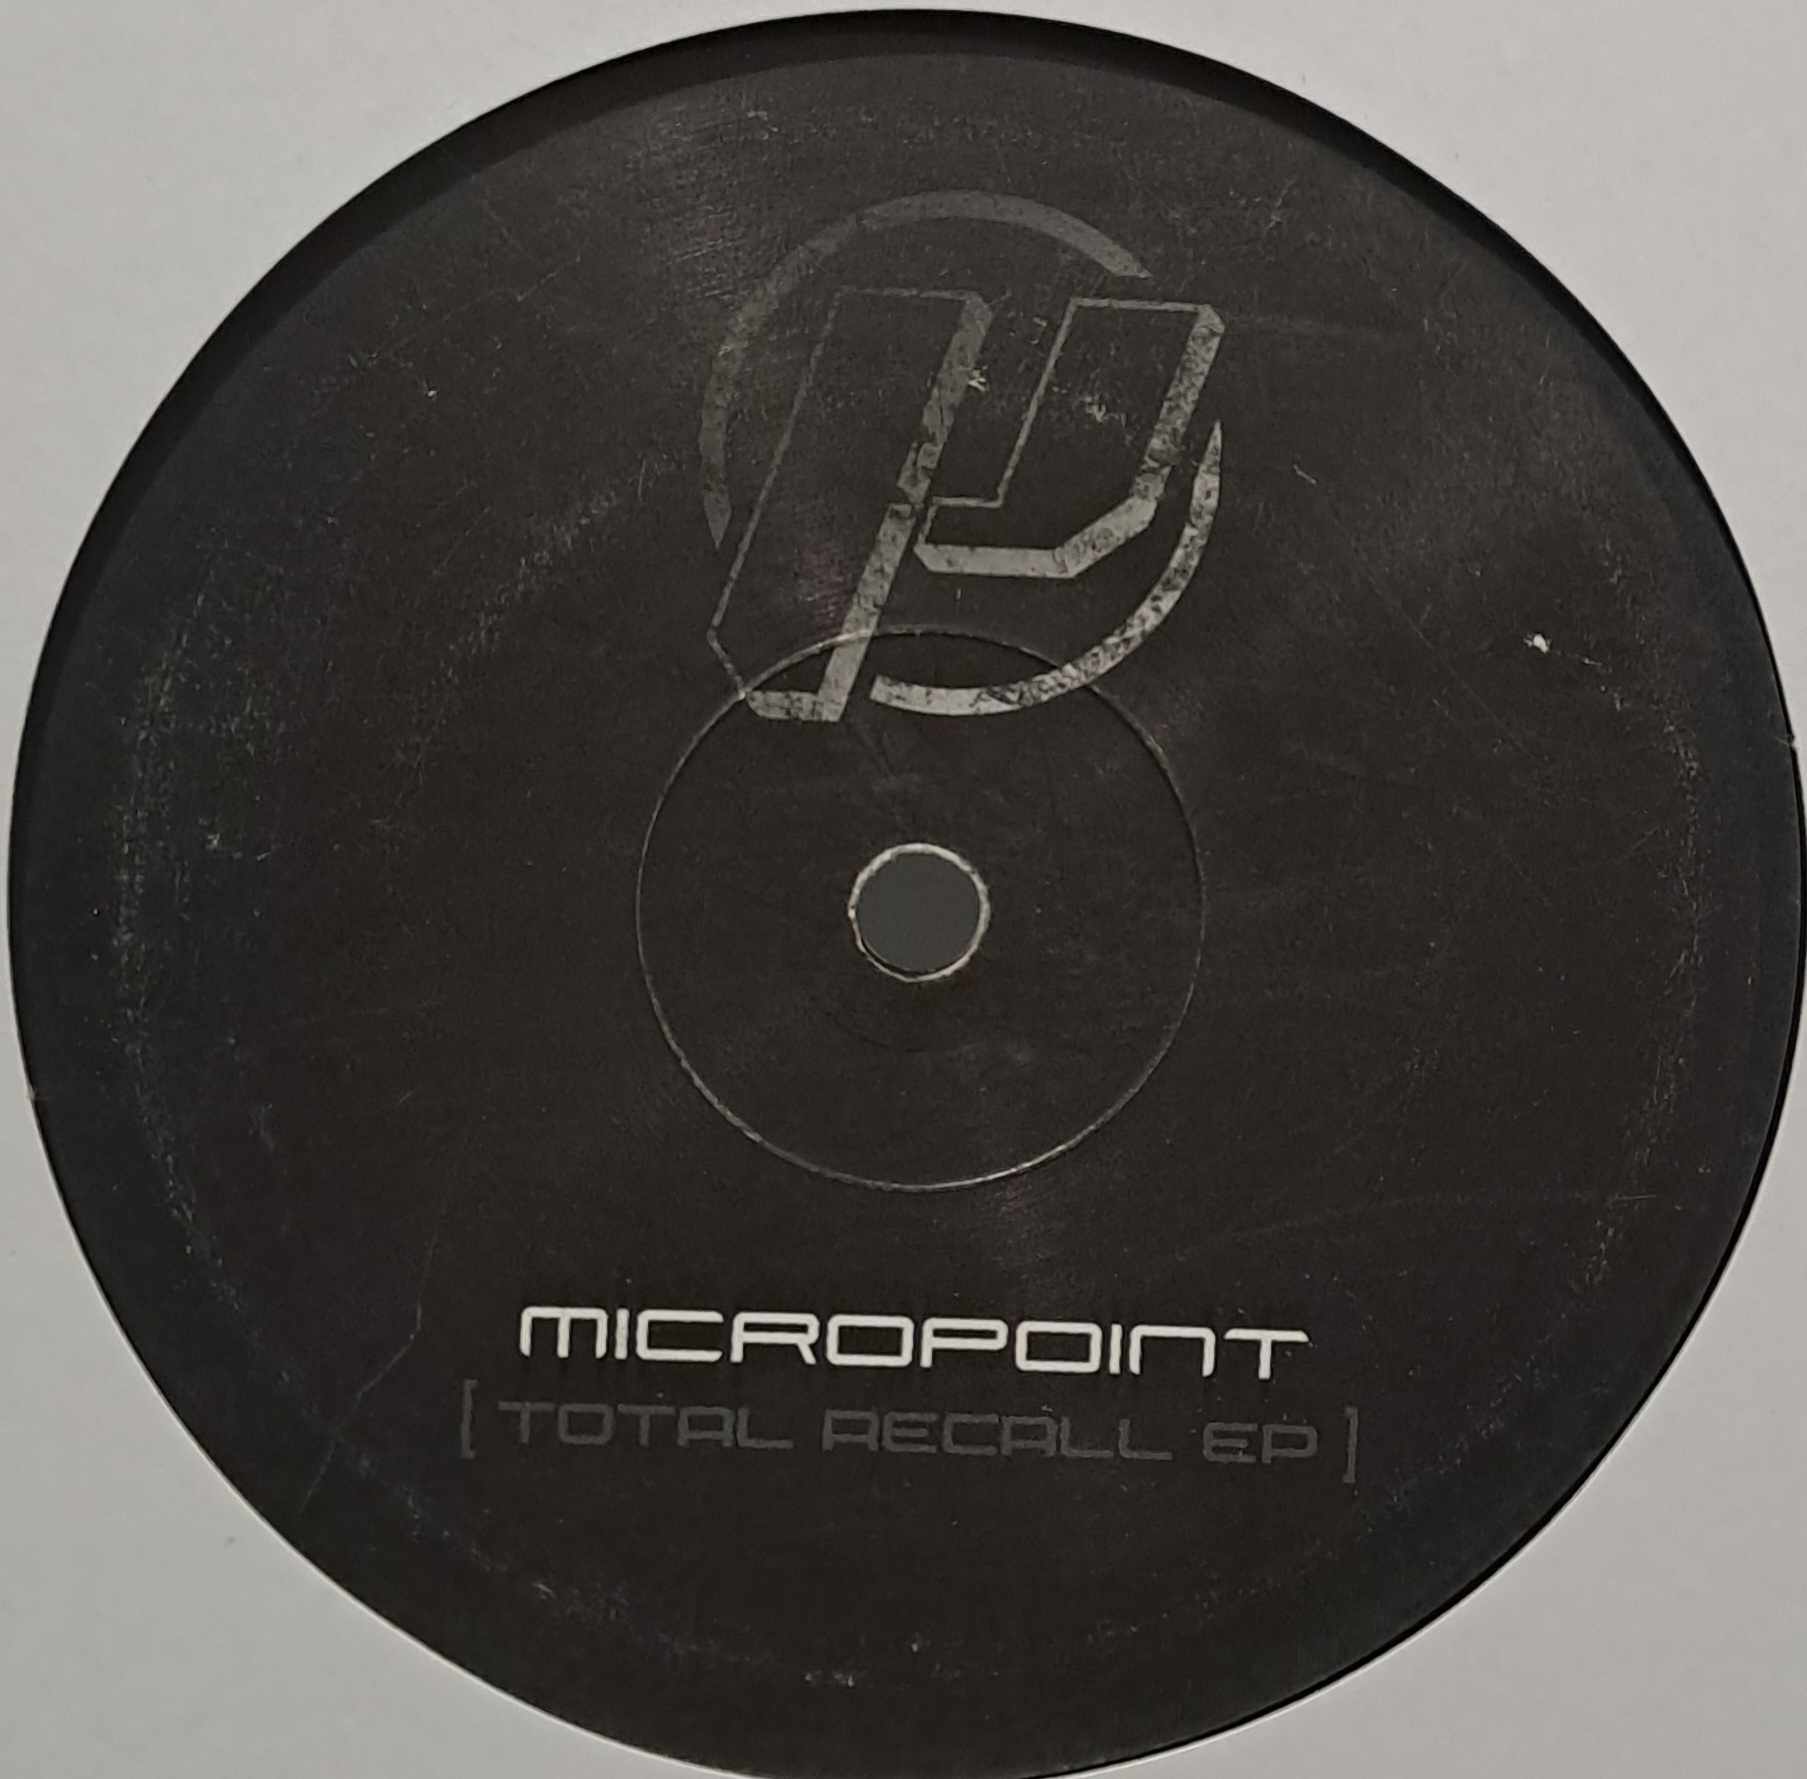 Micropoint Records 01 (Total Recall EP) - vinyle hardcore